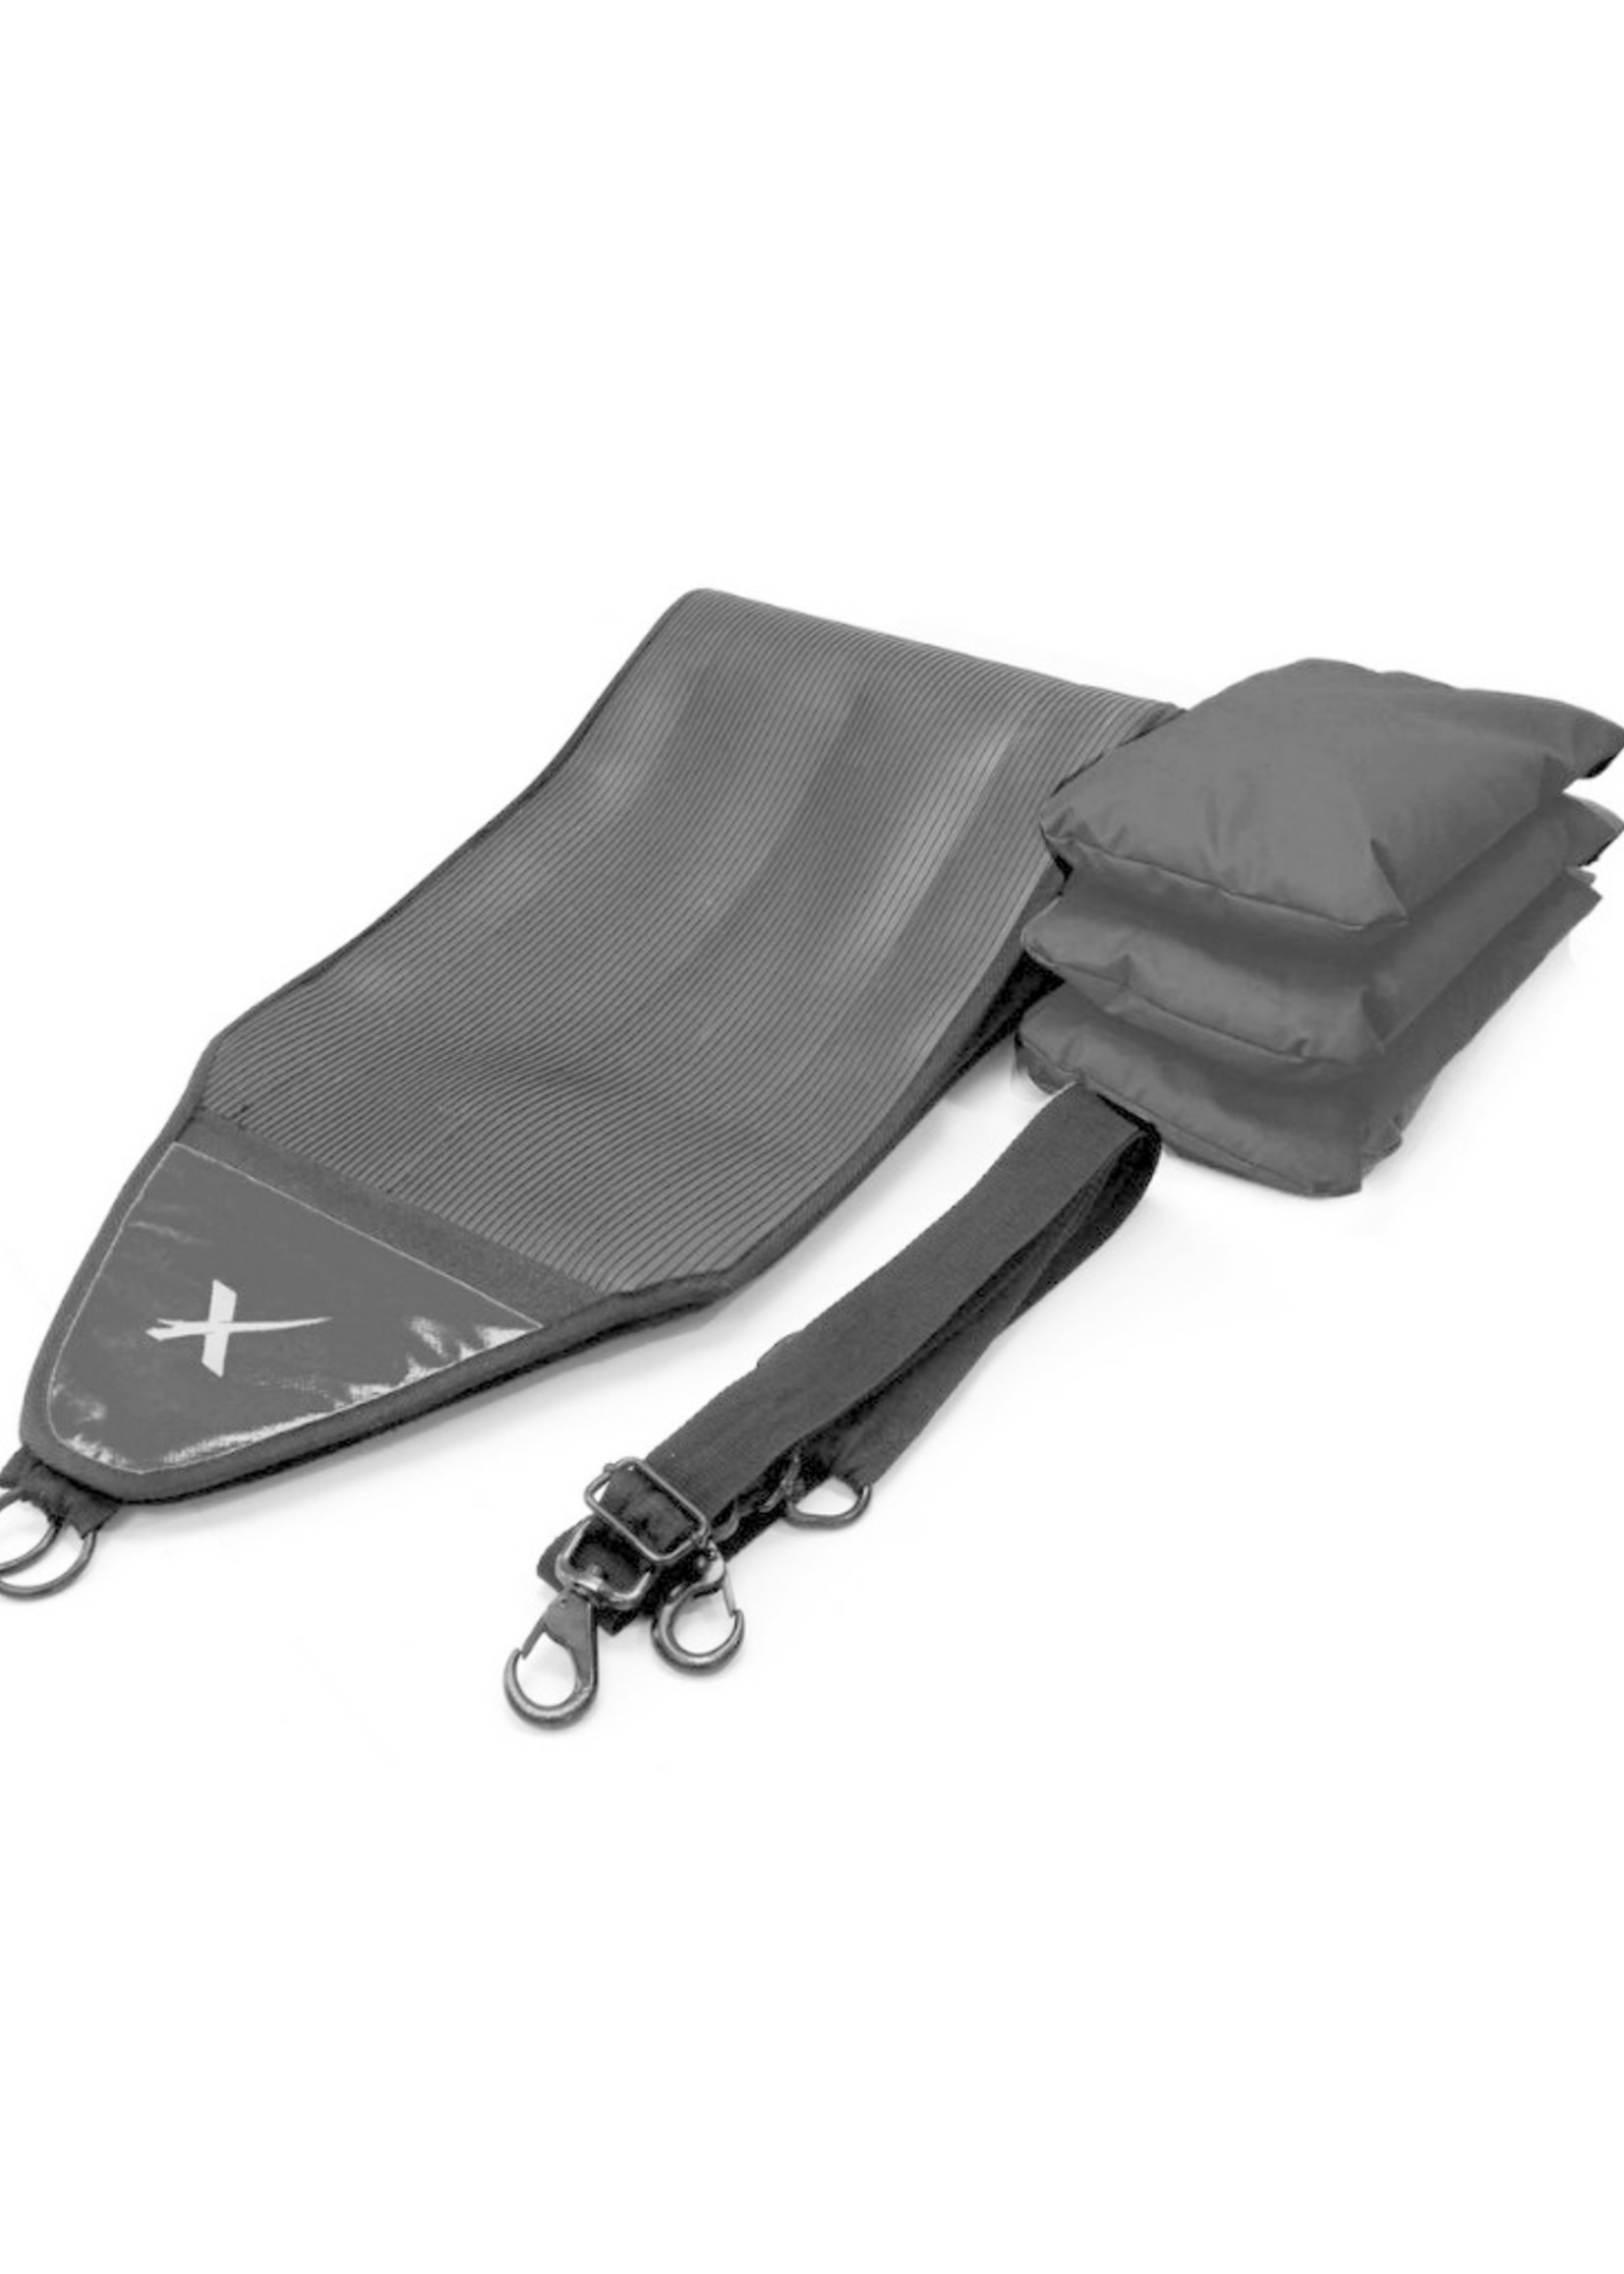  Xdog Weighted Drag Bag